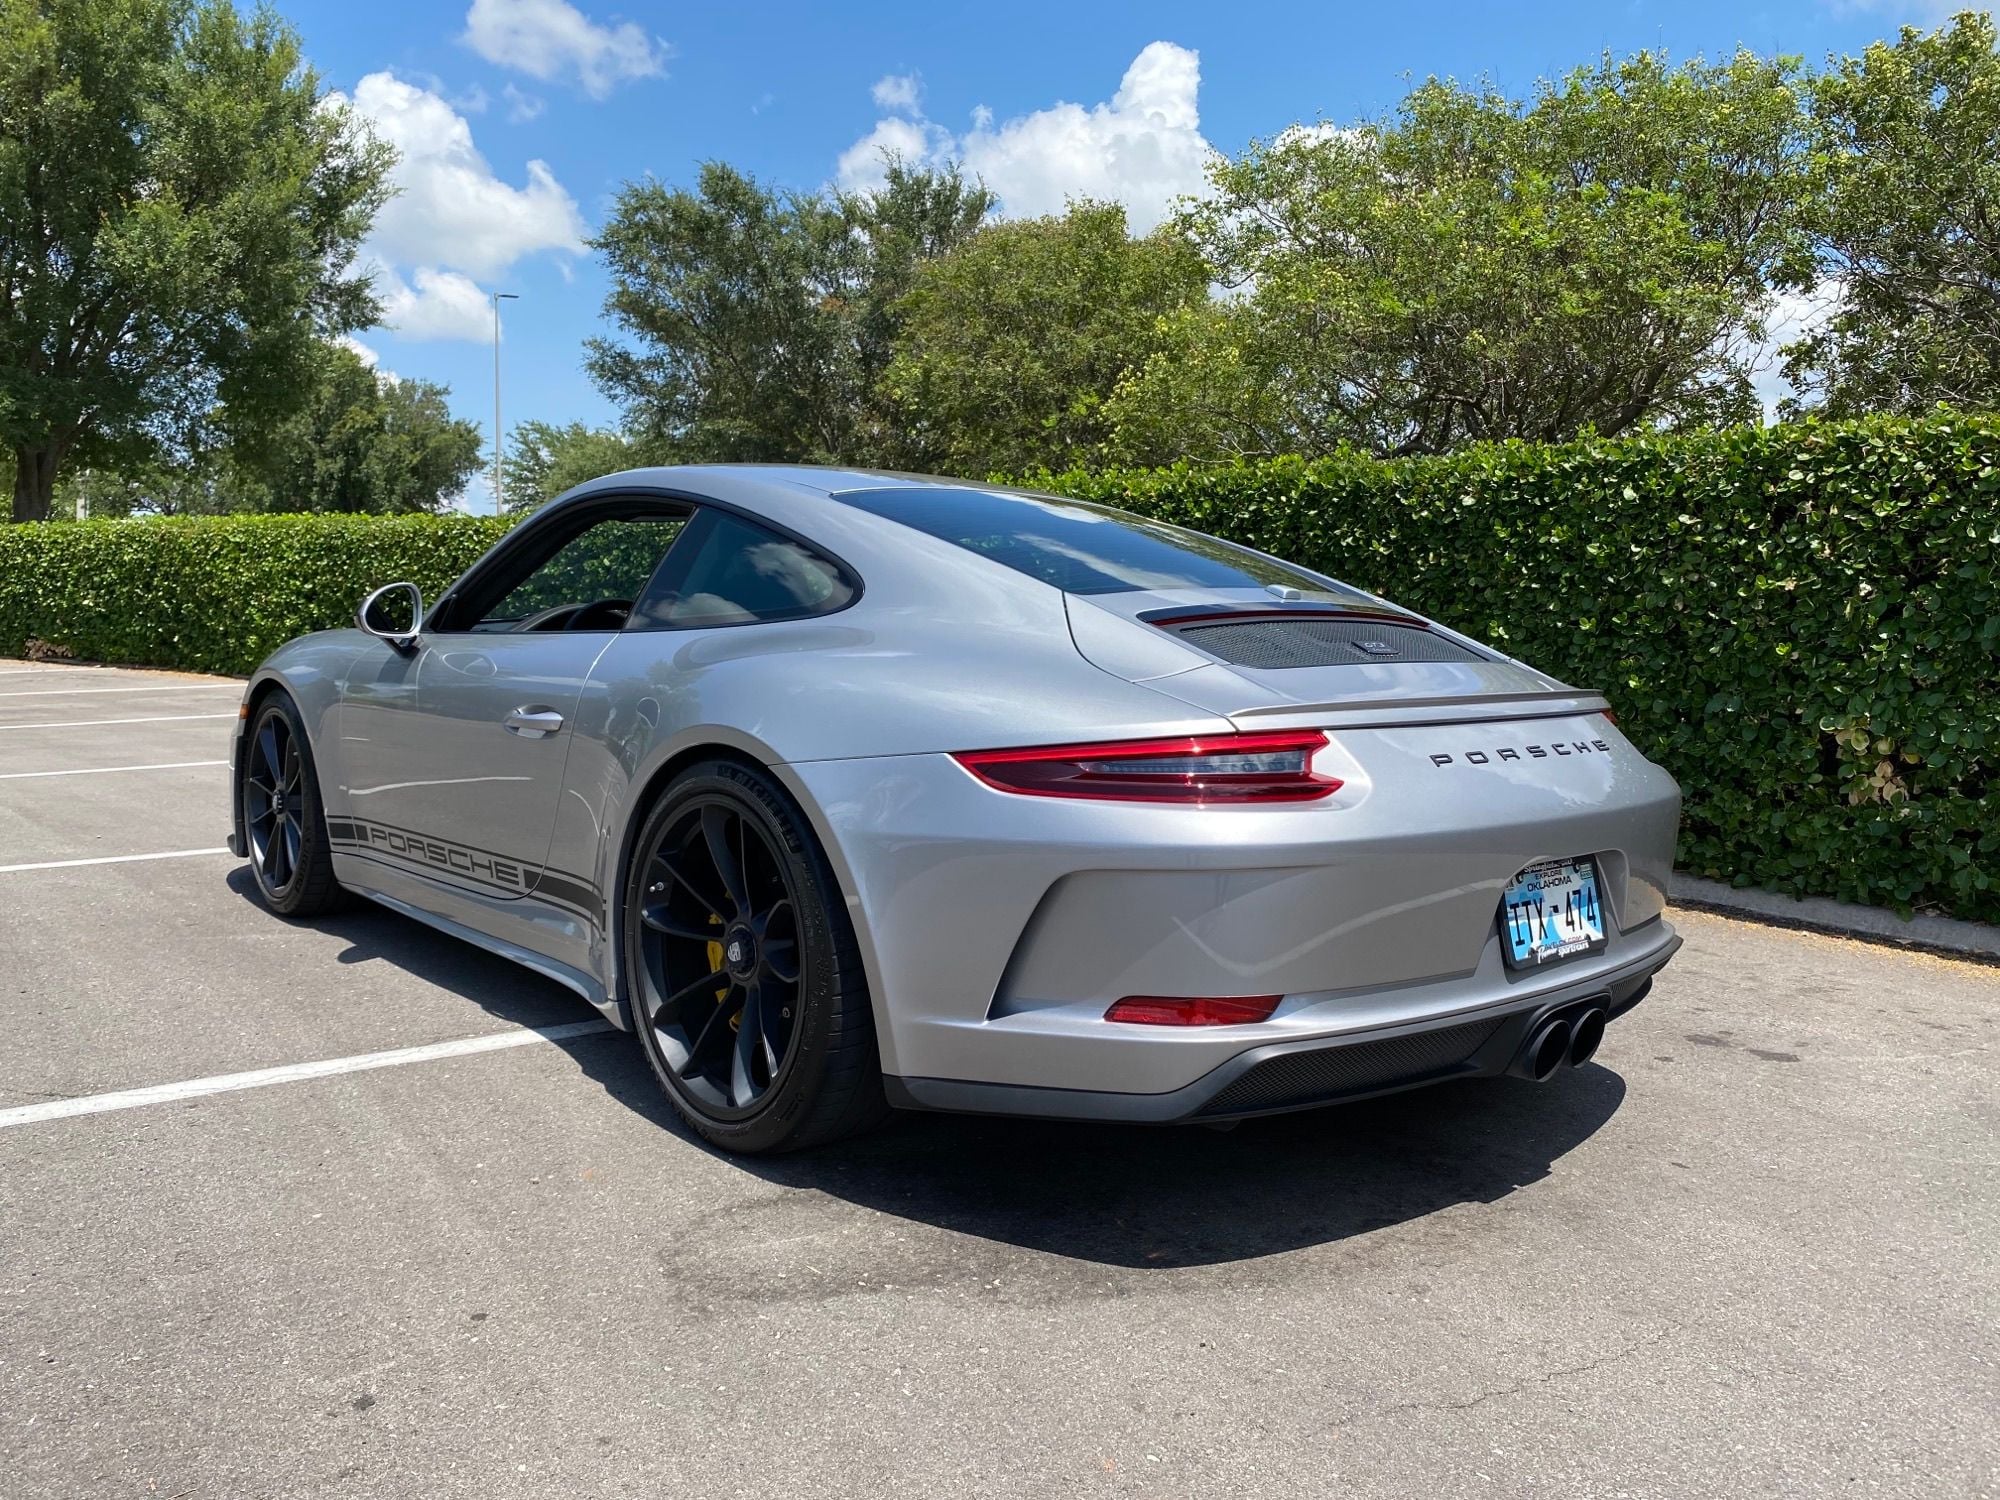 2018 Porsche 911 - 2018 Porsche 911 GT3 Touring - GT Silver - 14K miles - Used - VIN WP0AC2A90JS175259 - 14,250 Miles - 6 cyl - 2WD - Manual - Coupe - Silver - Oklahoma City, OK 73118, United States